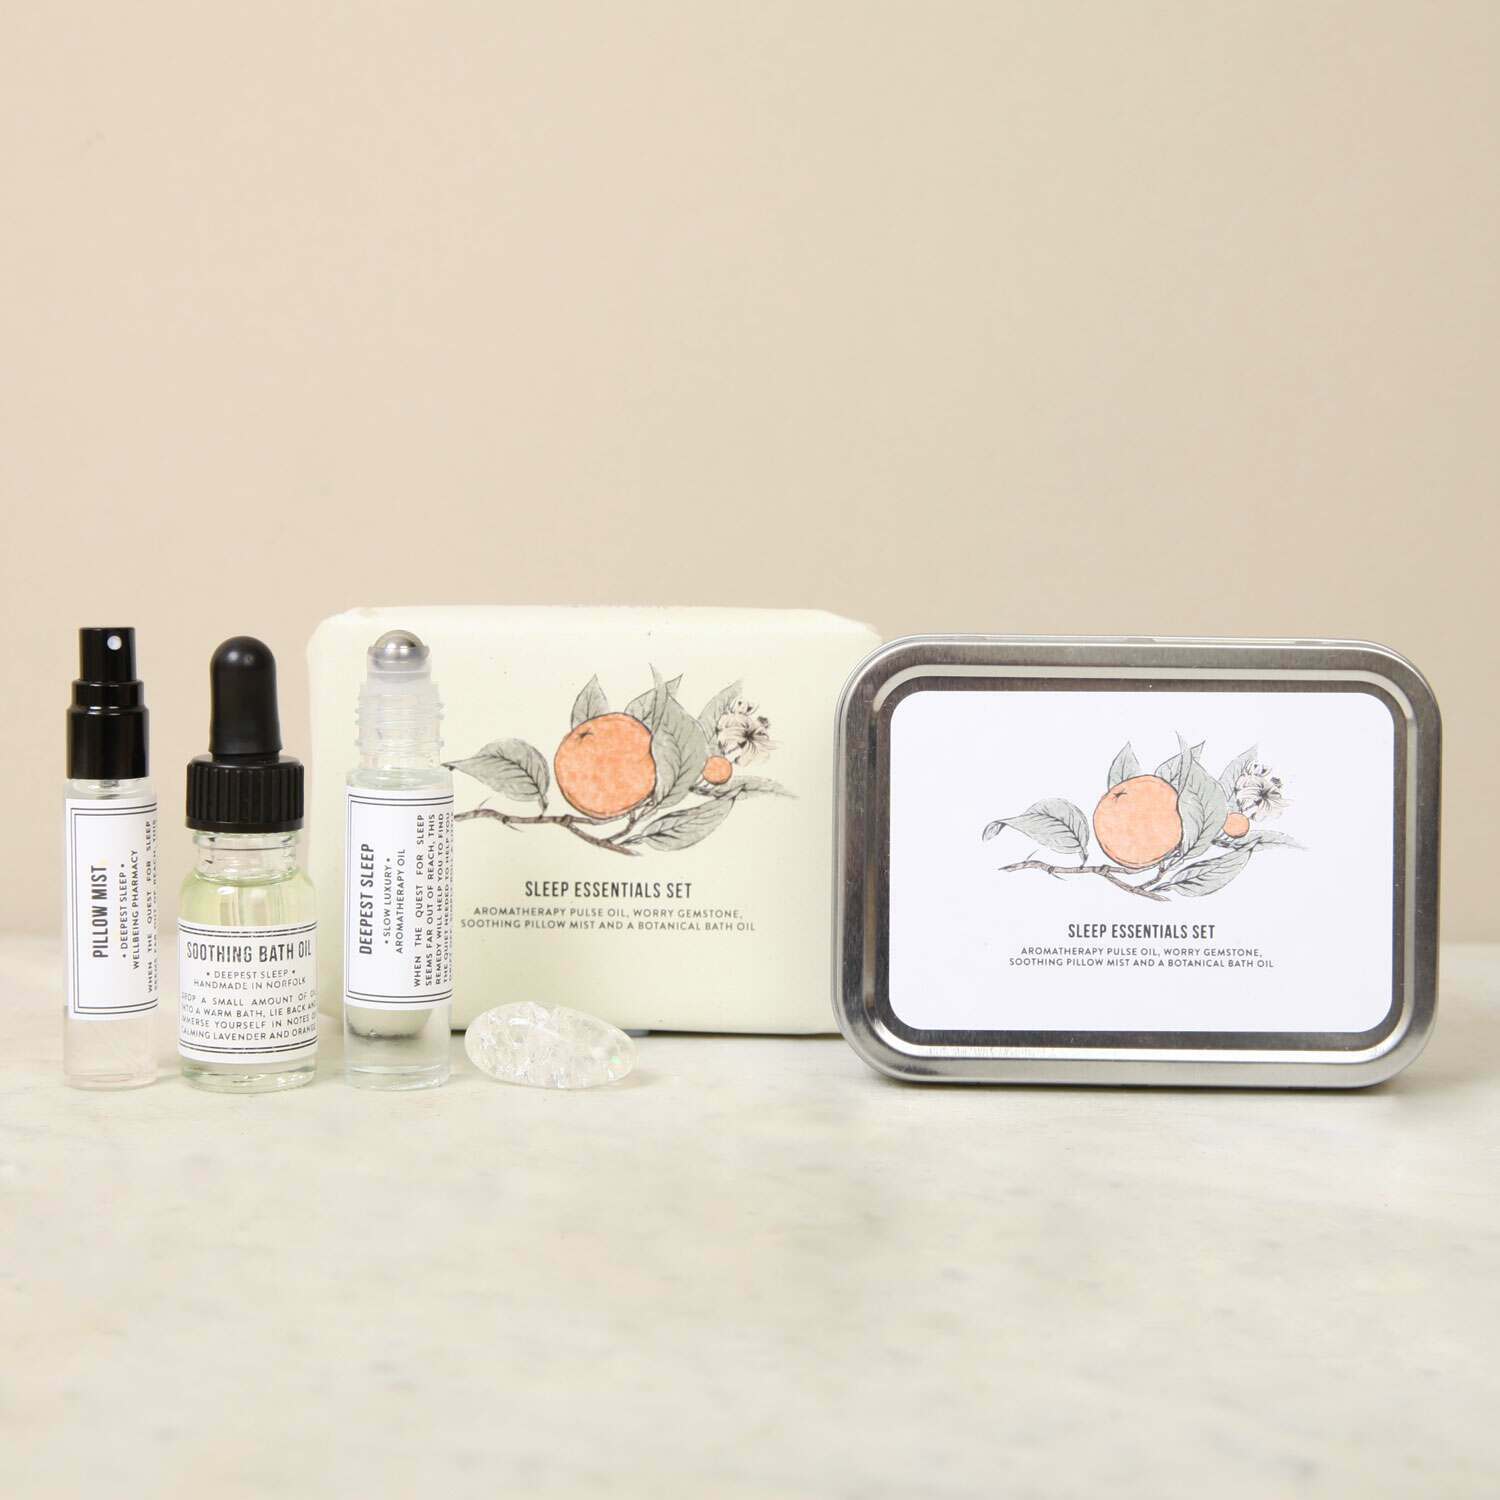 Read more about Graham and green deep sleep essentials set